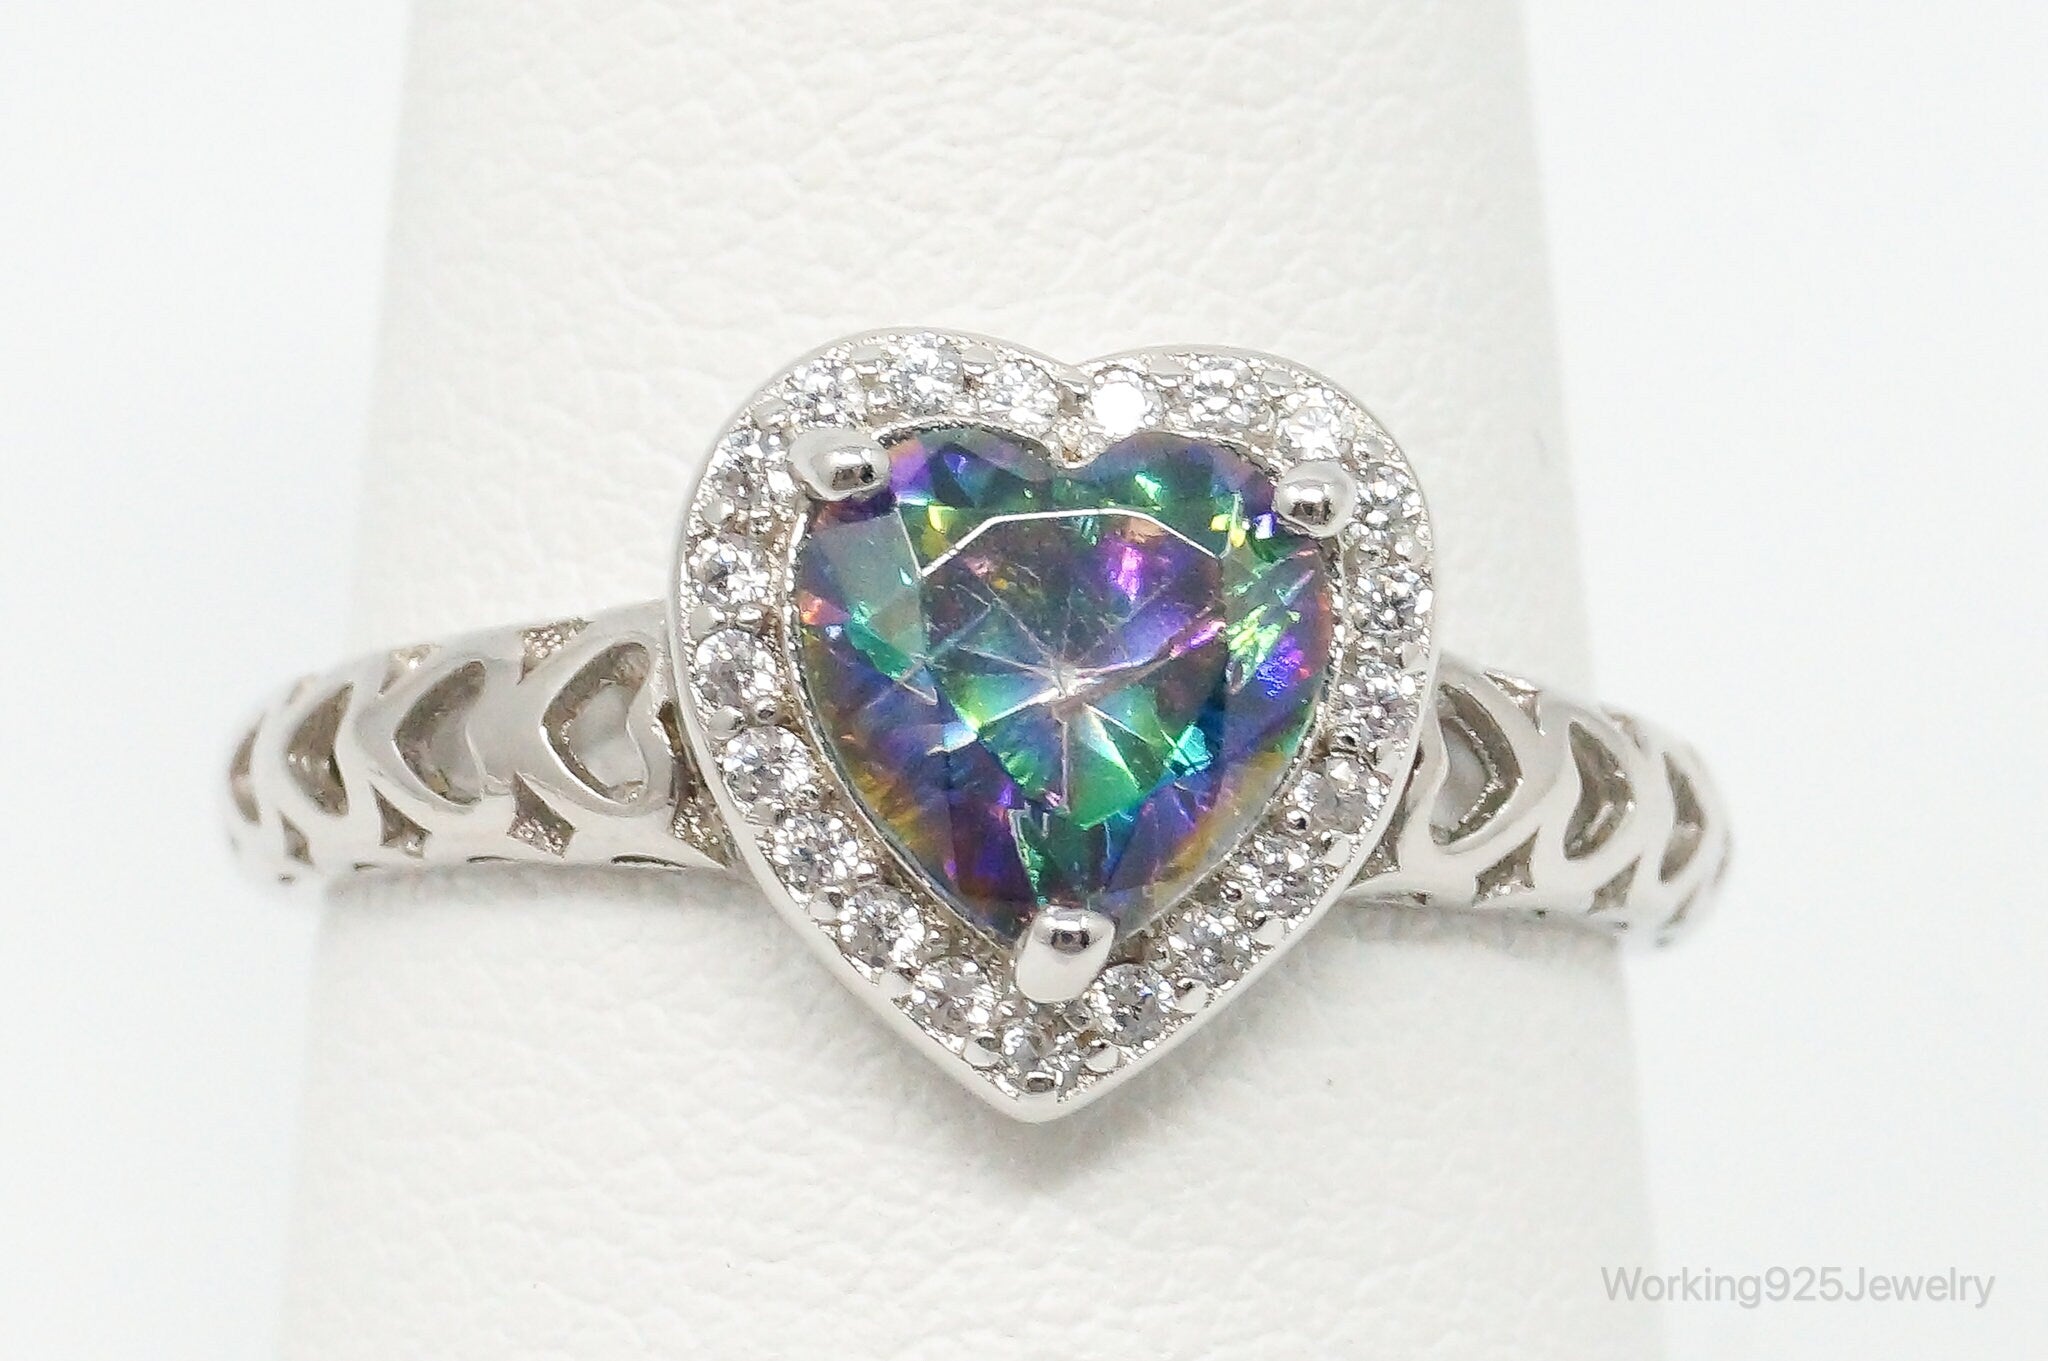 Mystic Topaz Heart Cubic Zirconia Sterling Silver Ring - Size 8